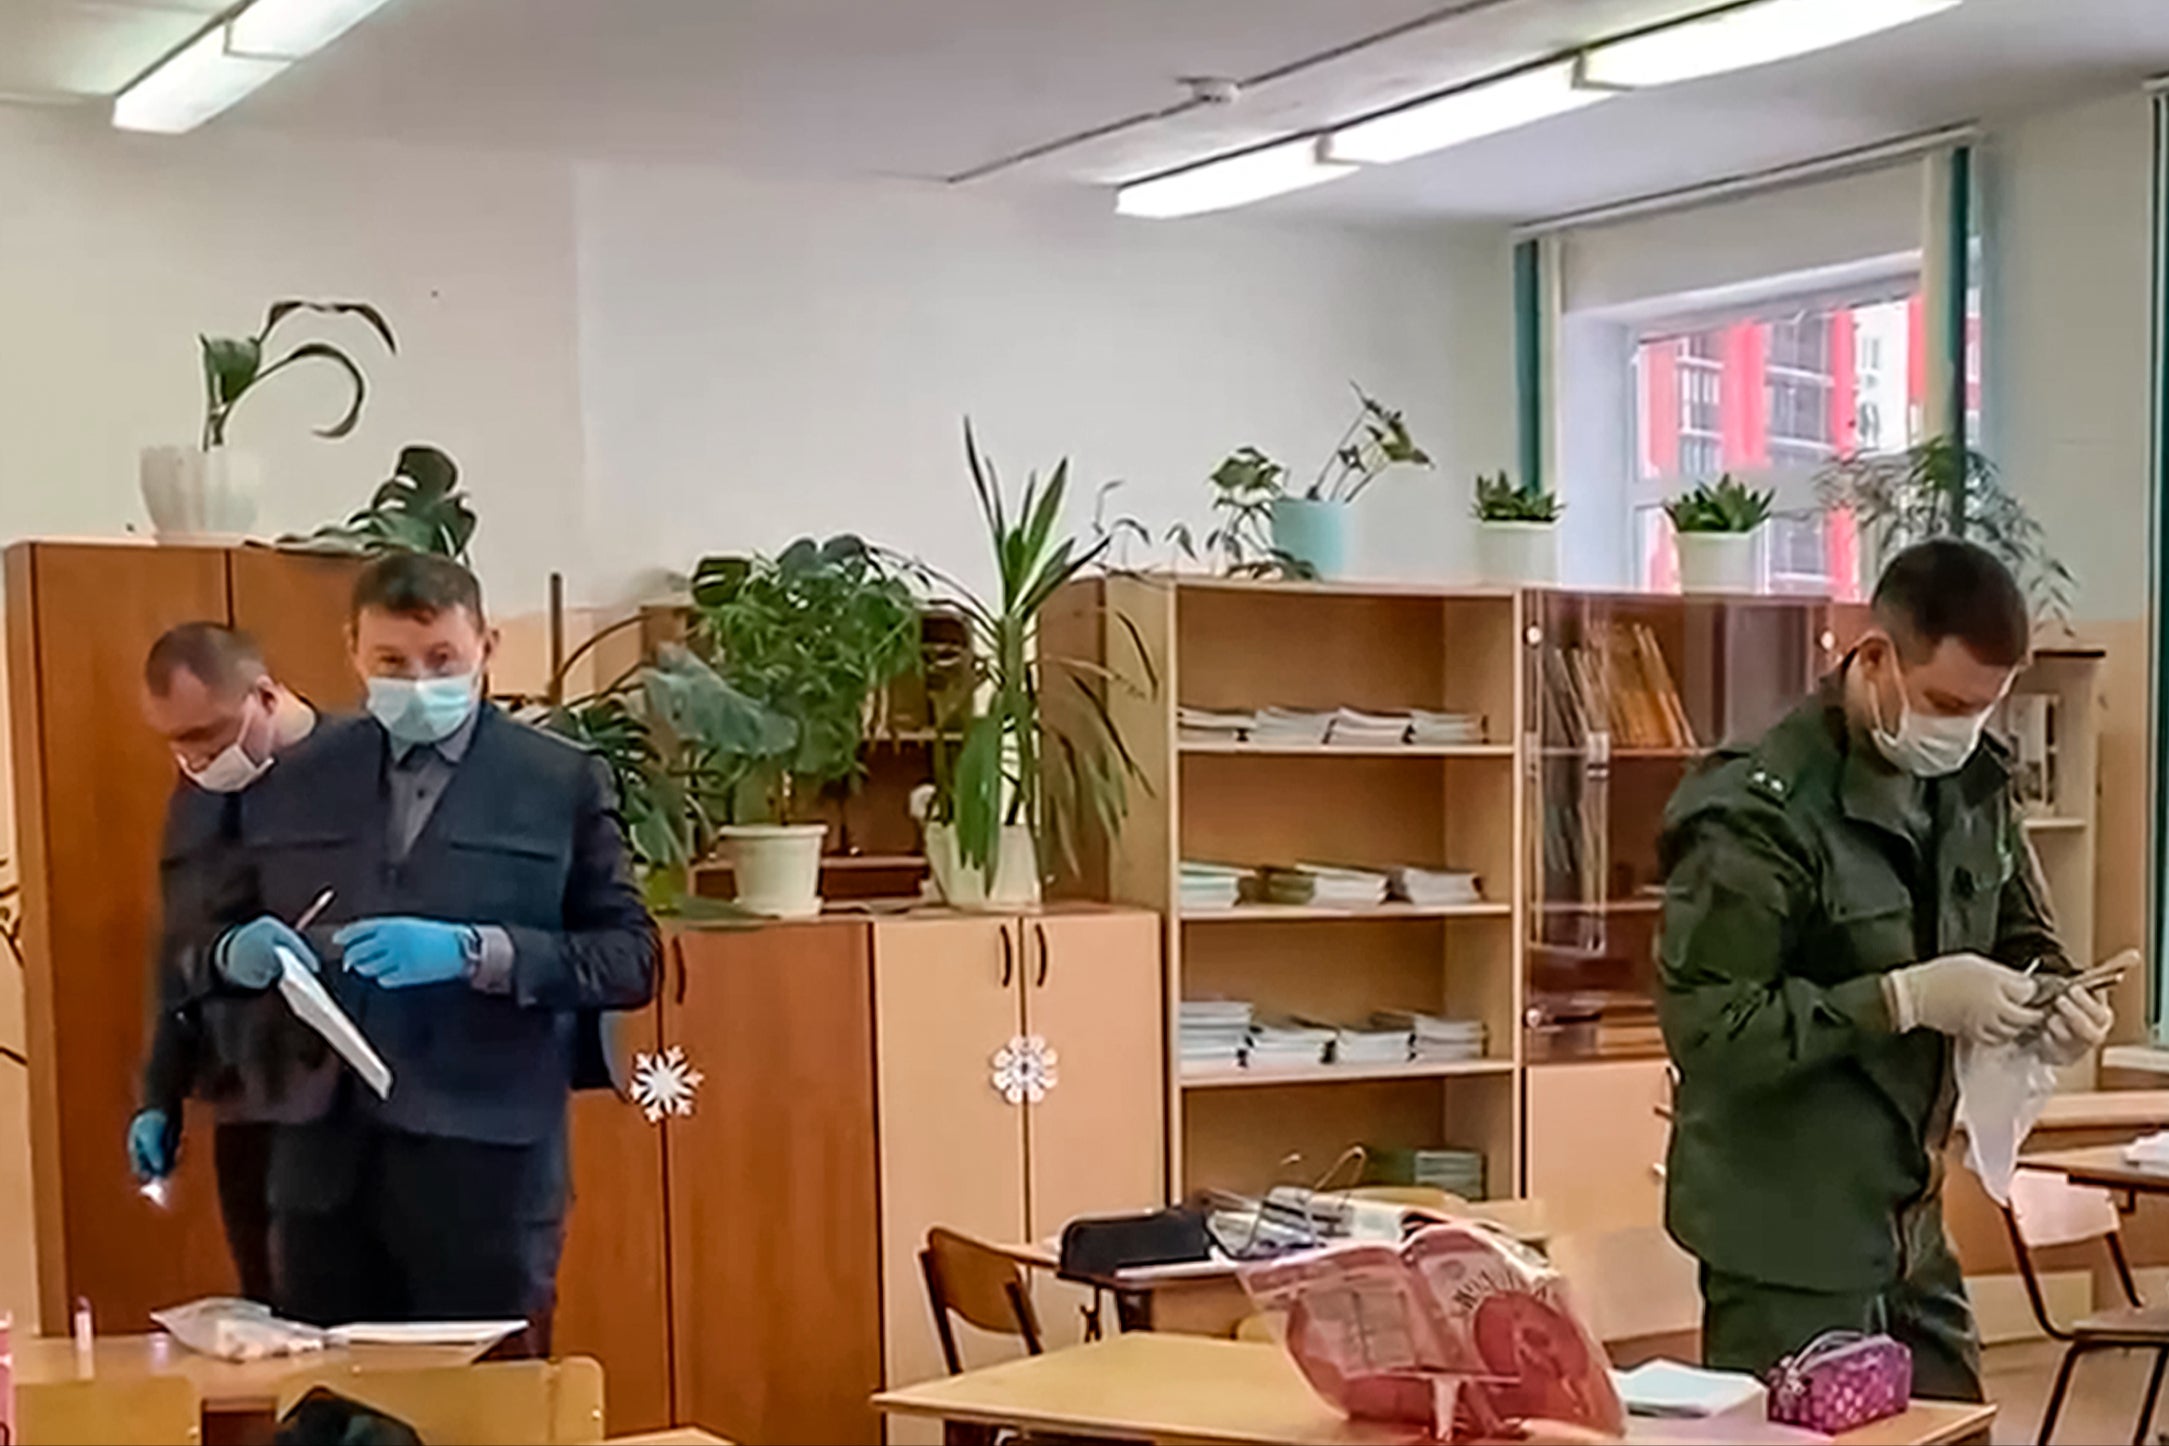 Investigators work at the scene of a shooting in a school classroom in Bryansk, Russia